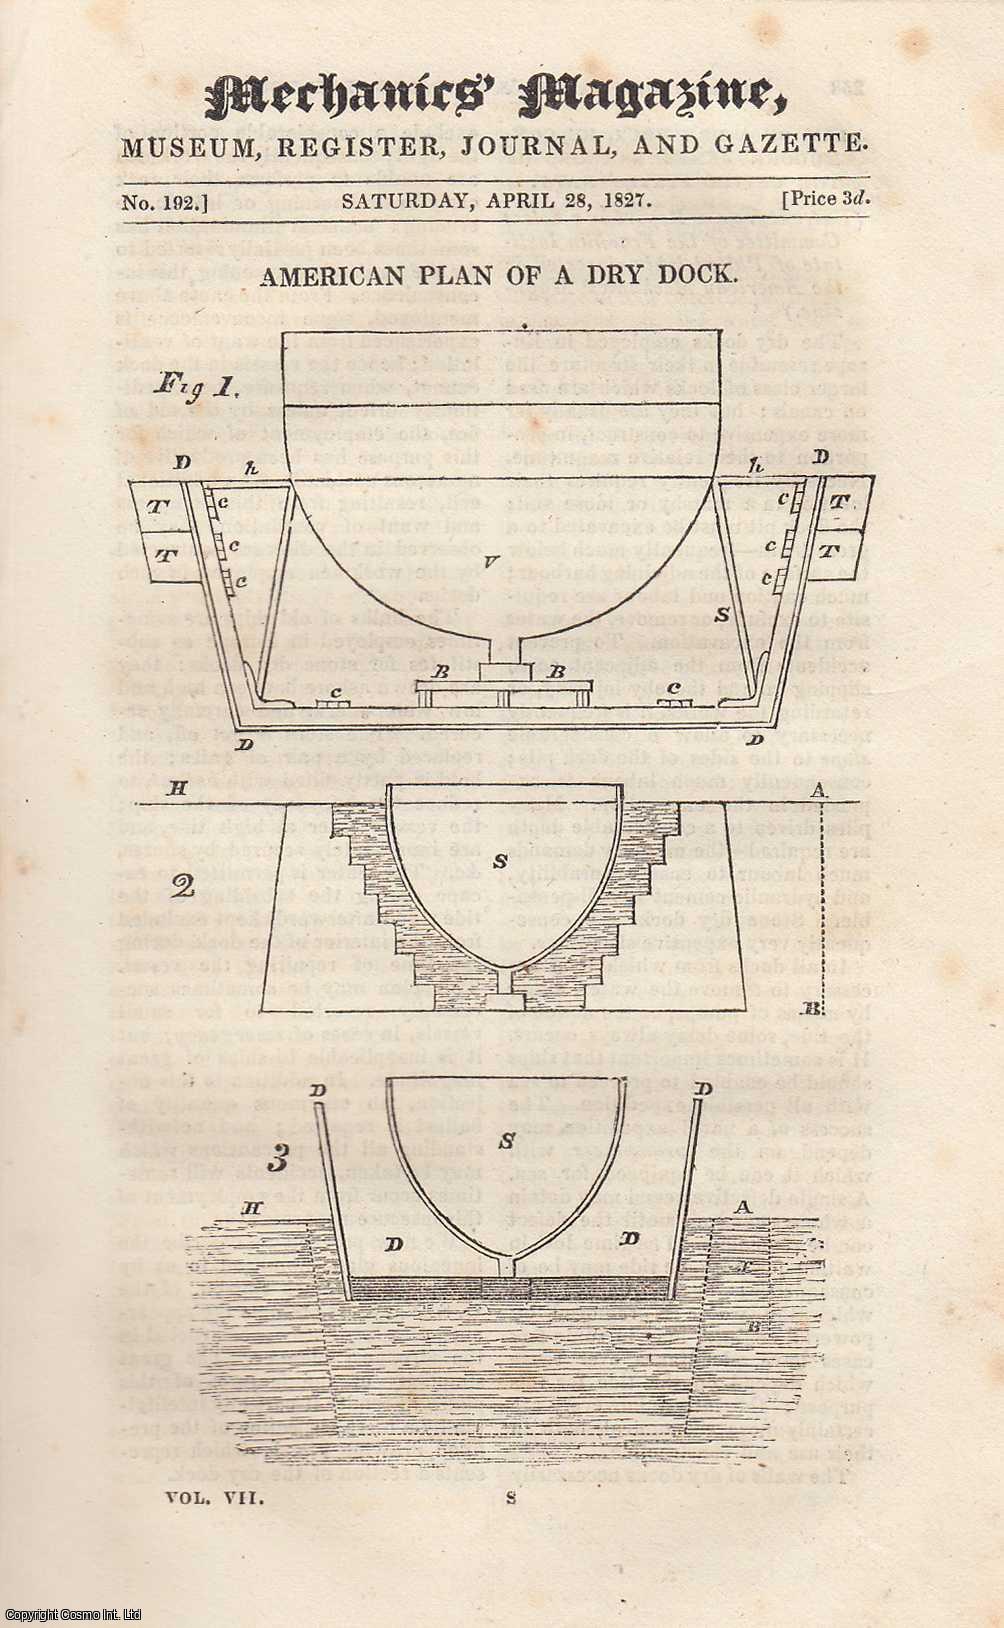 Mechanics Magazine - American Plan of a Dry Dock; Plan For Uniting a Windgauge with a Weathercock; Comparative Magnitude of The Planets, etc. Mechanics Magazine, Museum, Register, Journal and Gazette. Issue No. 192. A complete rare weekly issue of the Mechanics' Magazine, 1827.